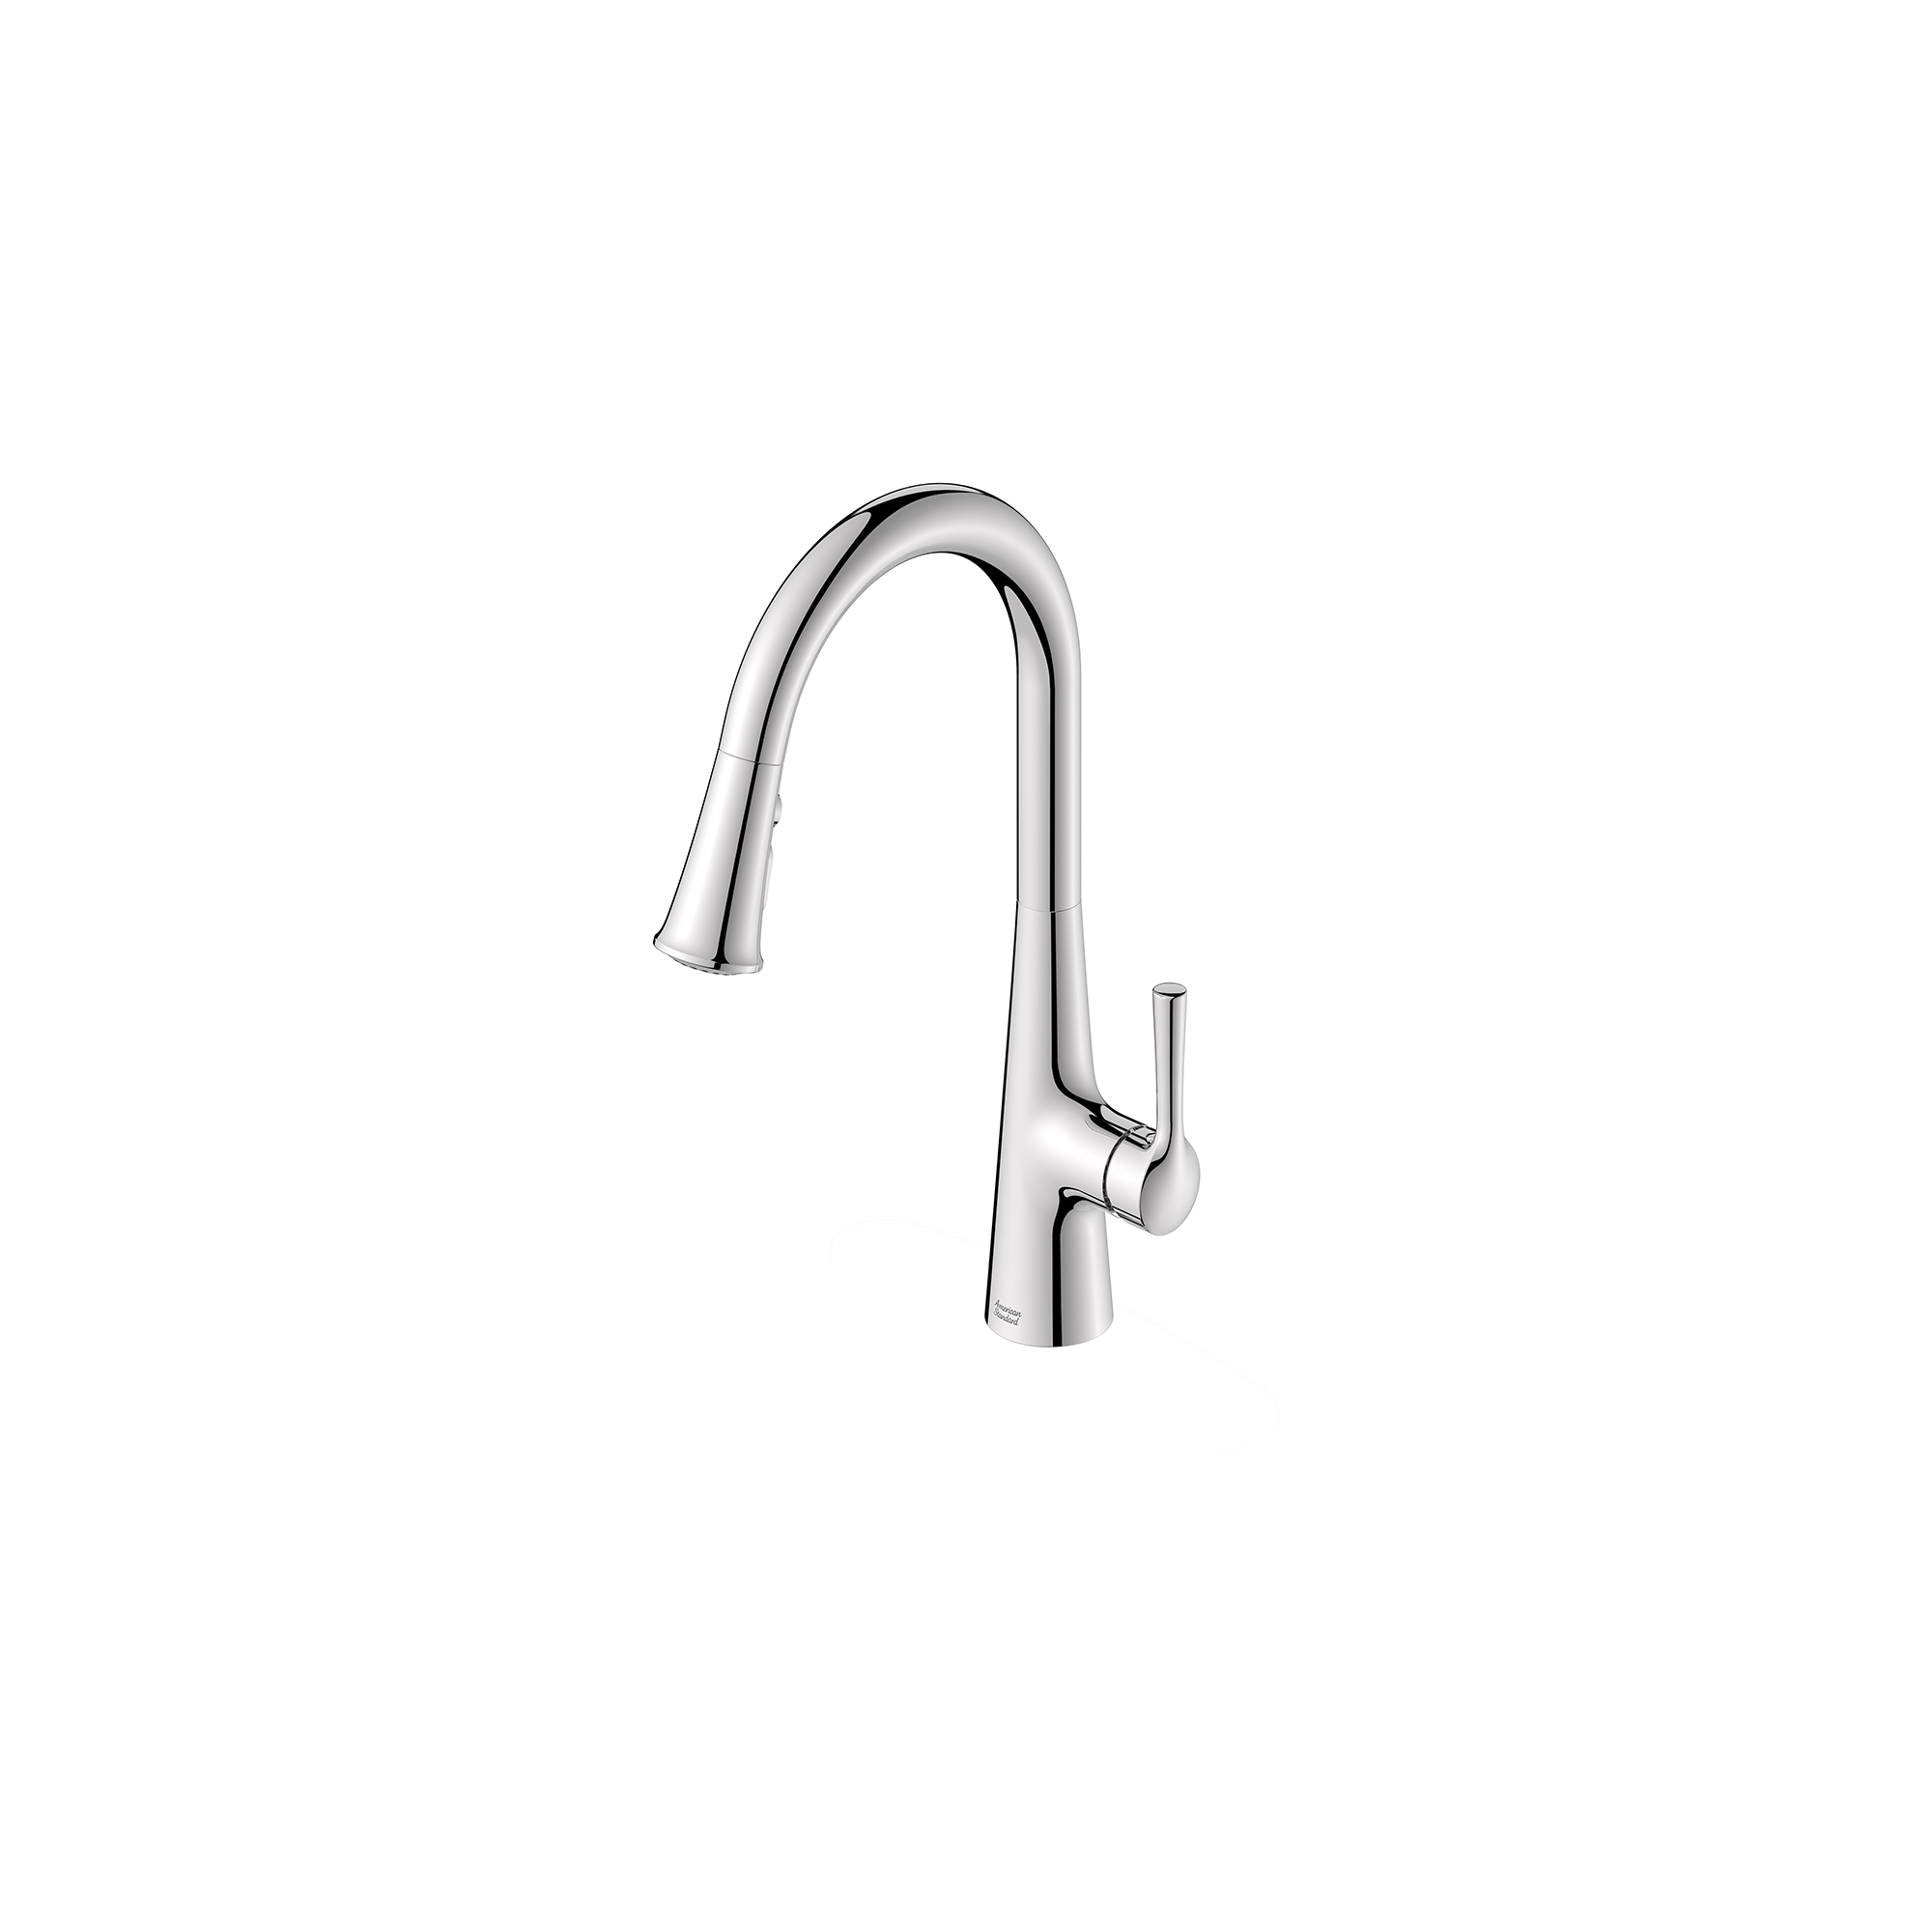 Southport Pull-Down Dual Spray Kitchen Faucet 1.8 GPM/6.8 L/min